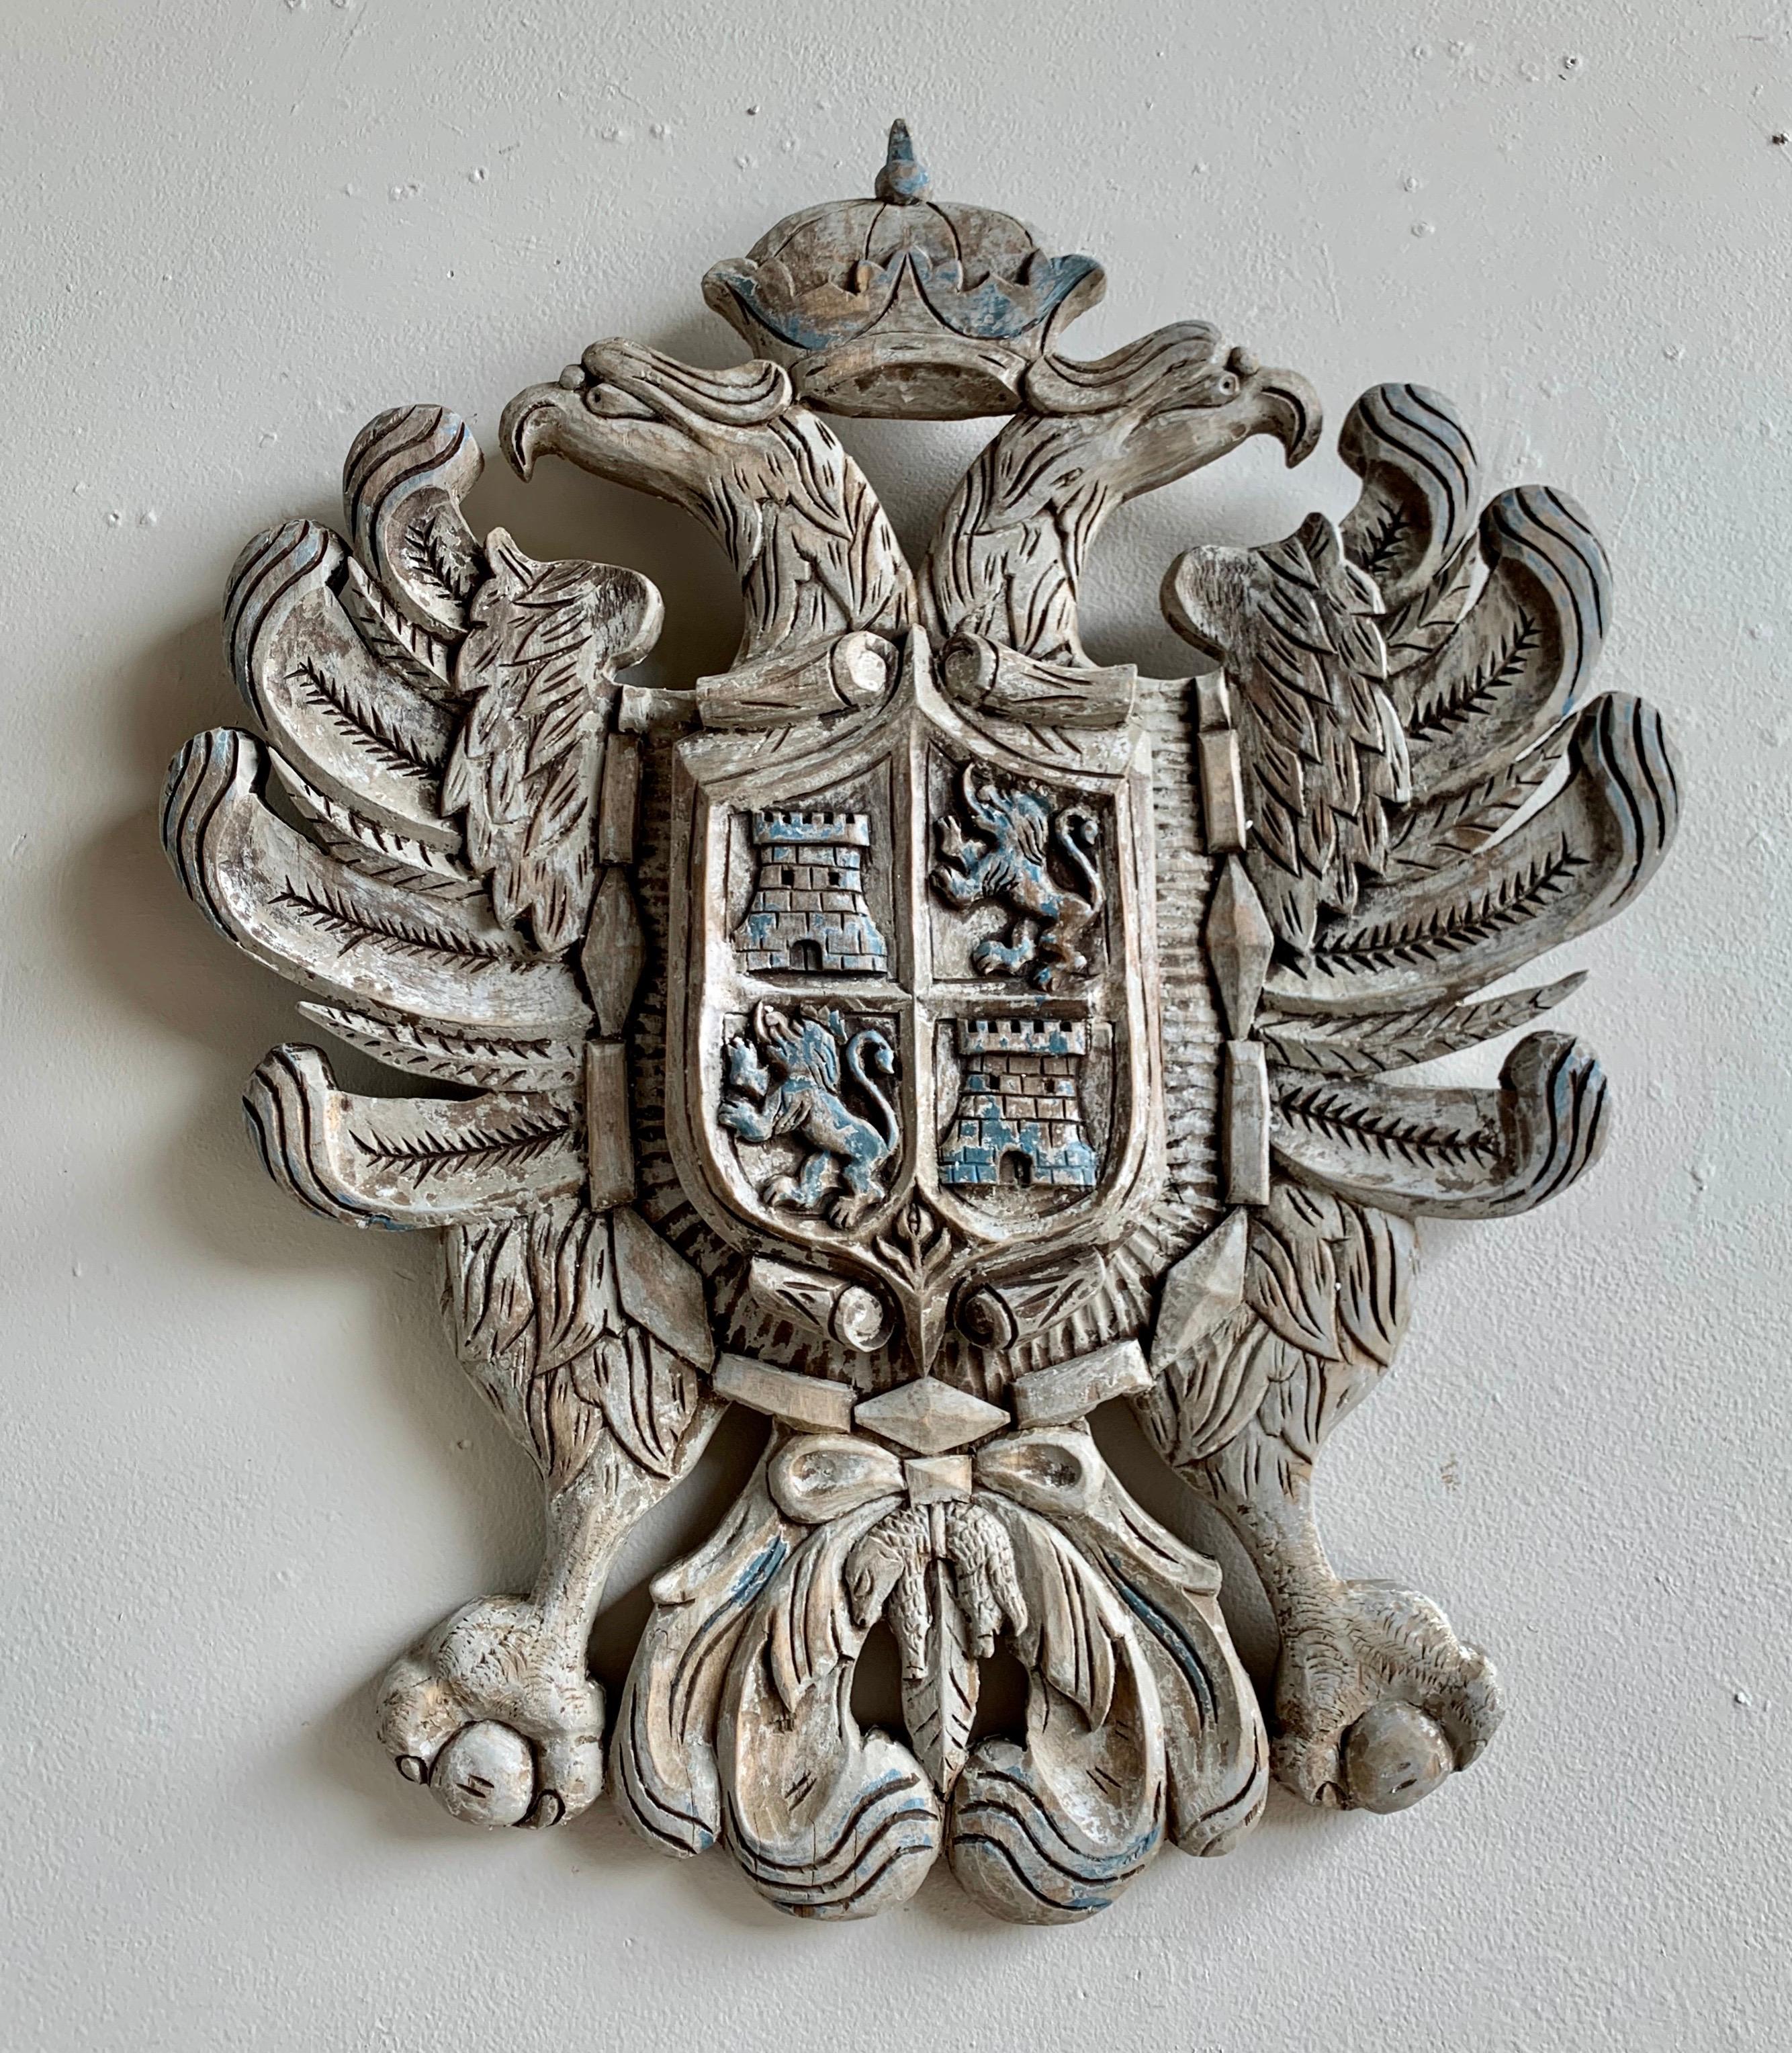 Pair of similar 19th century hand carved English coat of arms. The carvings depict a two-headed eagle with the royal crown. Remnants of paint can still be see throughout. They are not an exact pair as they are both hand carved but they have been